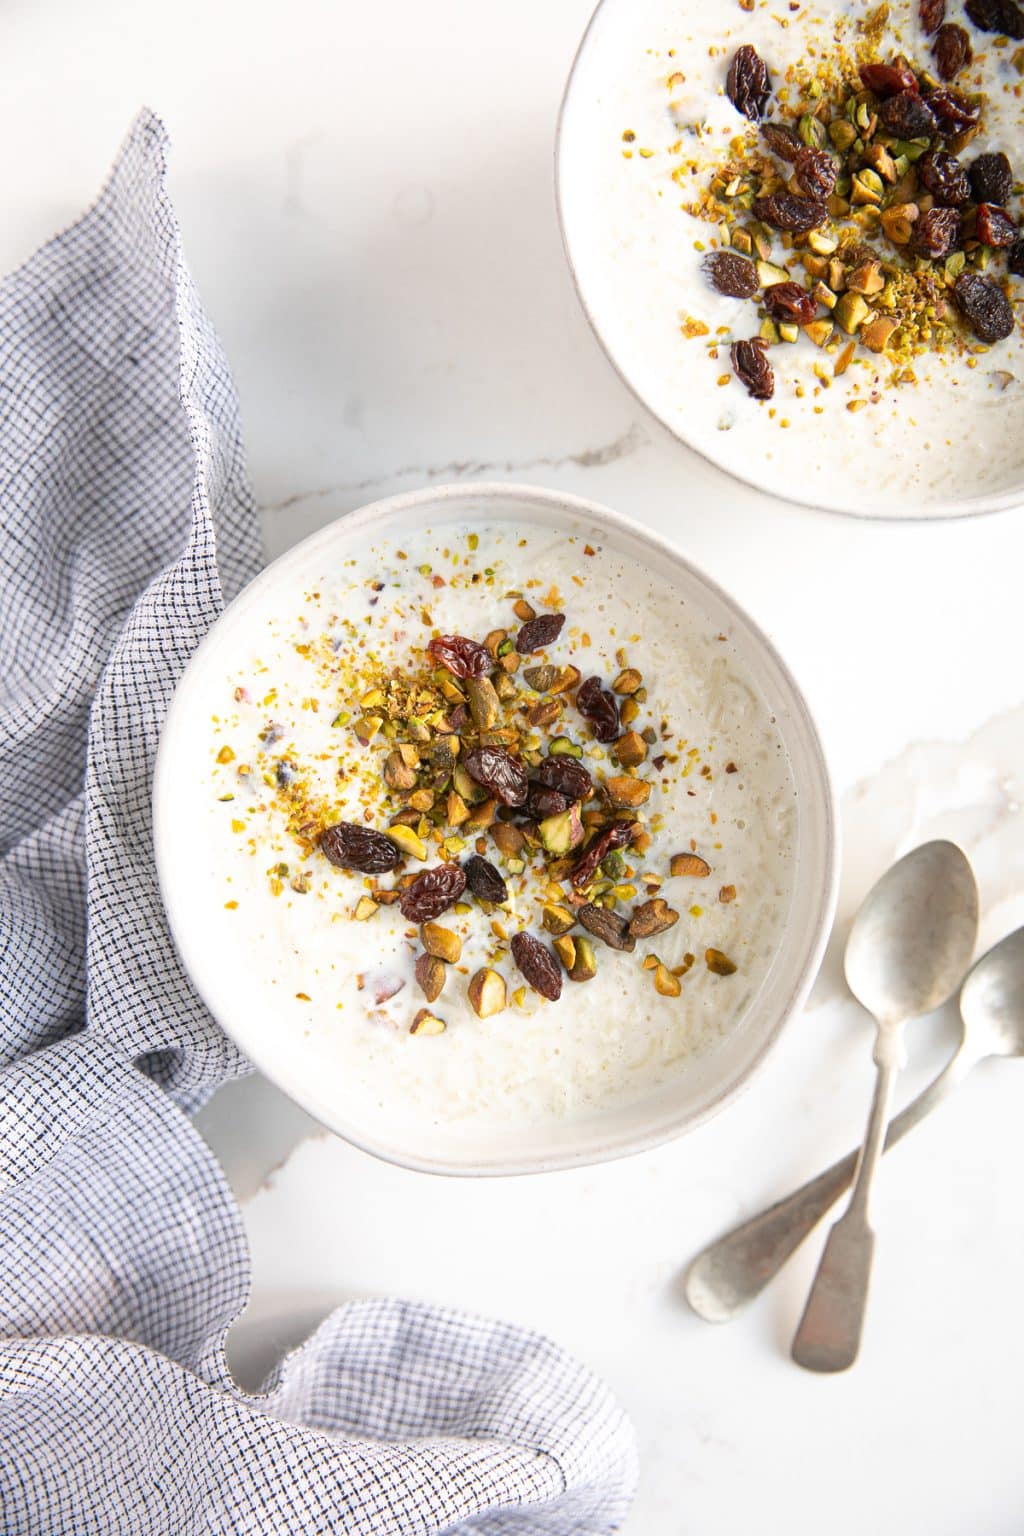 Kheer Recipe (Indian Rice Pudding) - The Forked Spoon